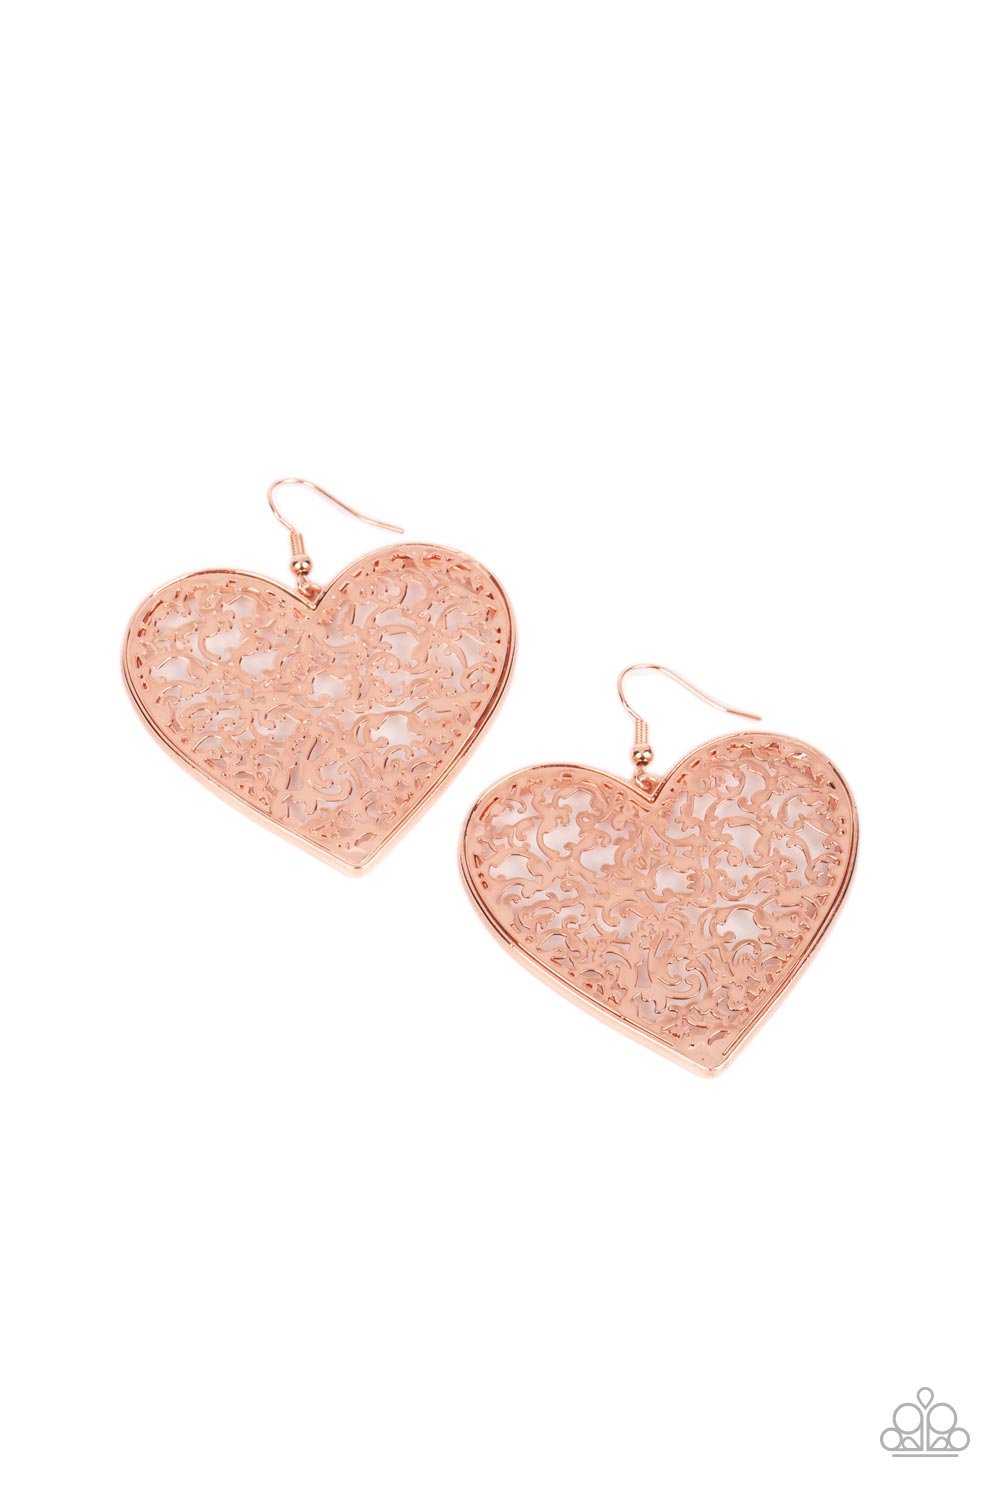 Paparazzi Fairest in the Land - Copper Earring